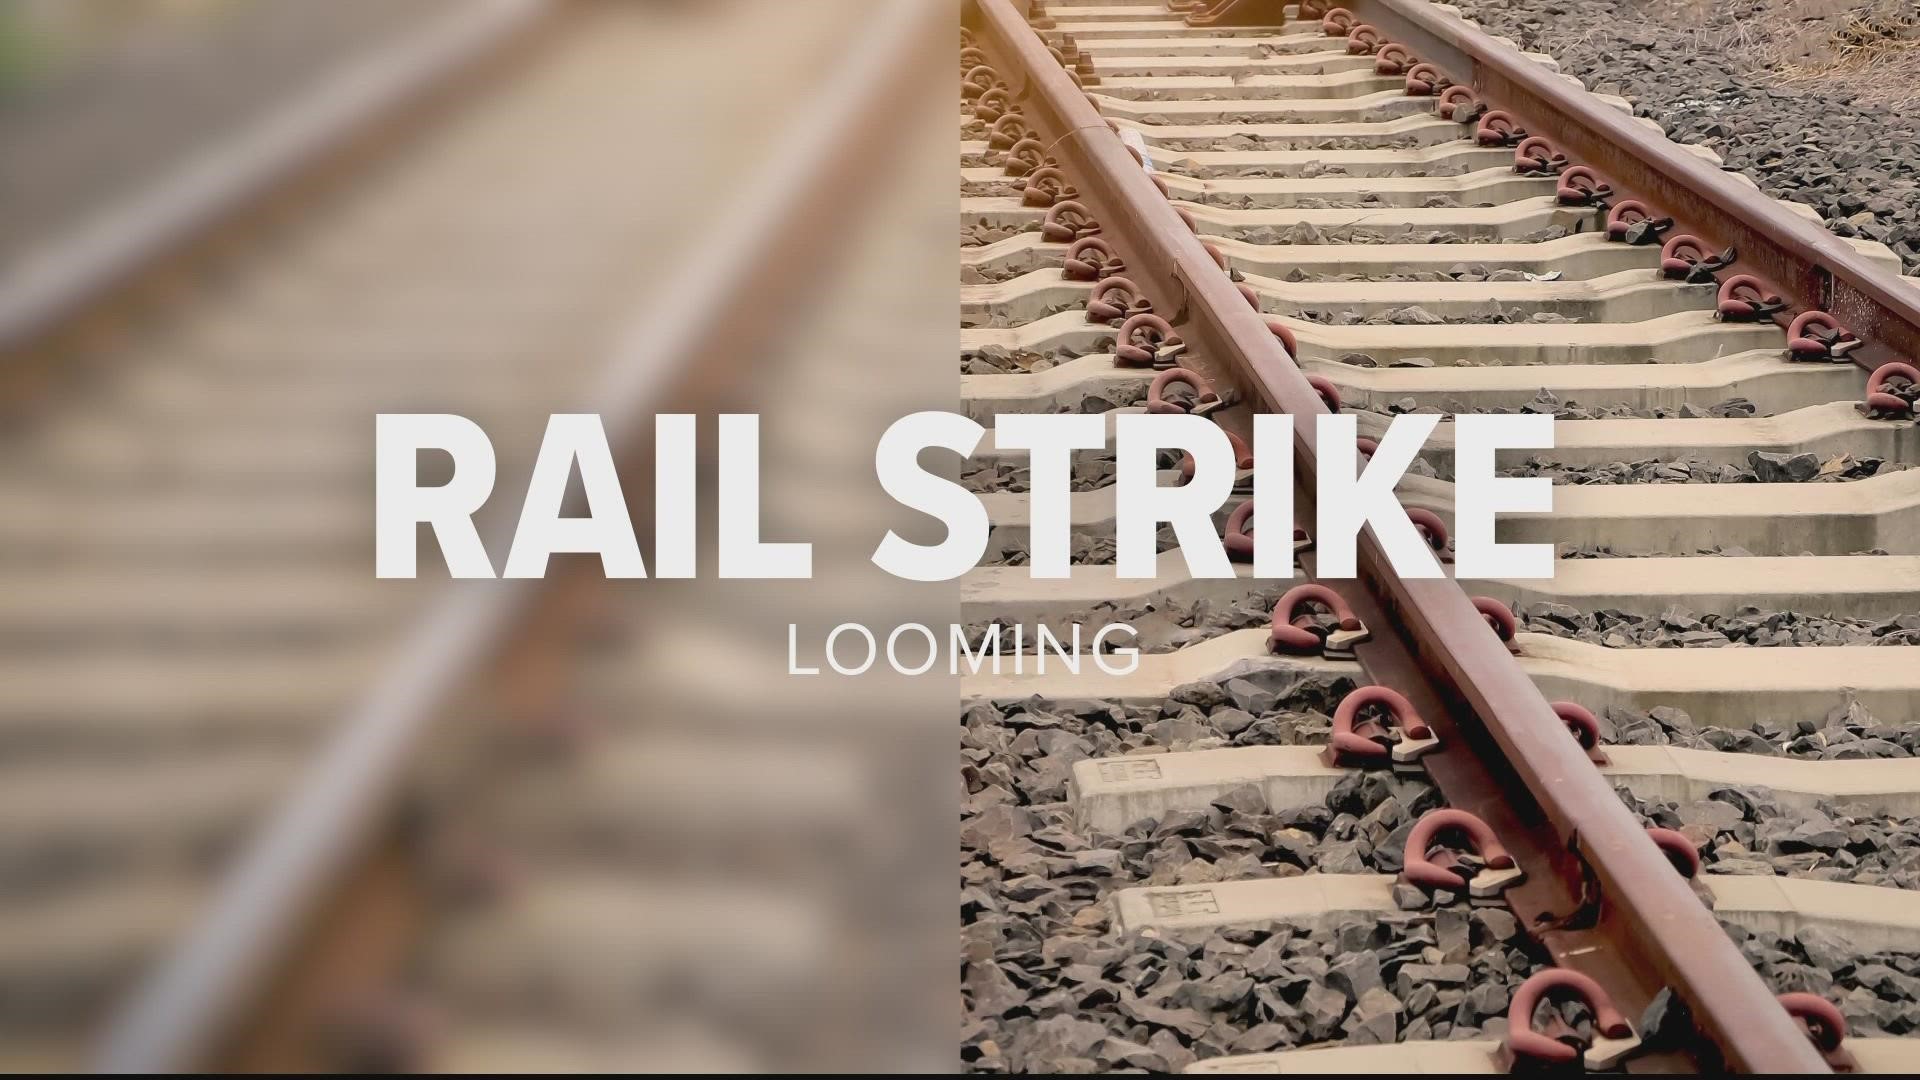 Rail workers could soon go on strike. How it could impact your holiday plans.